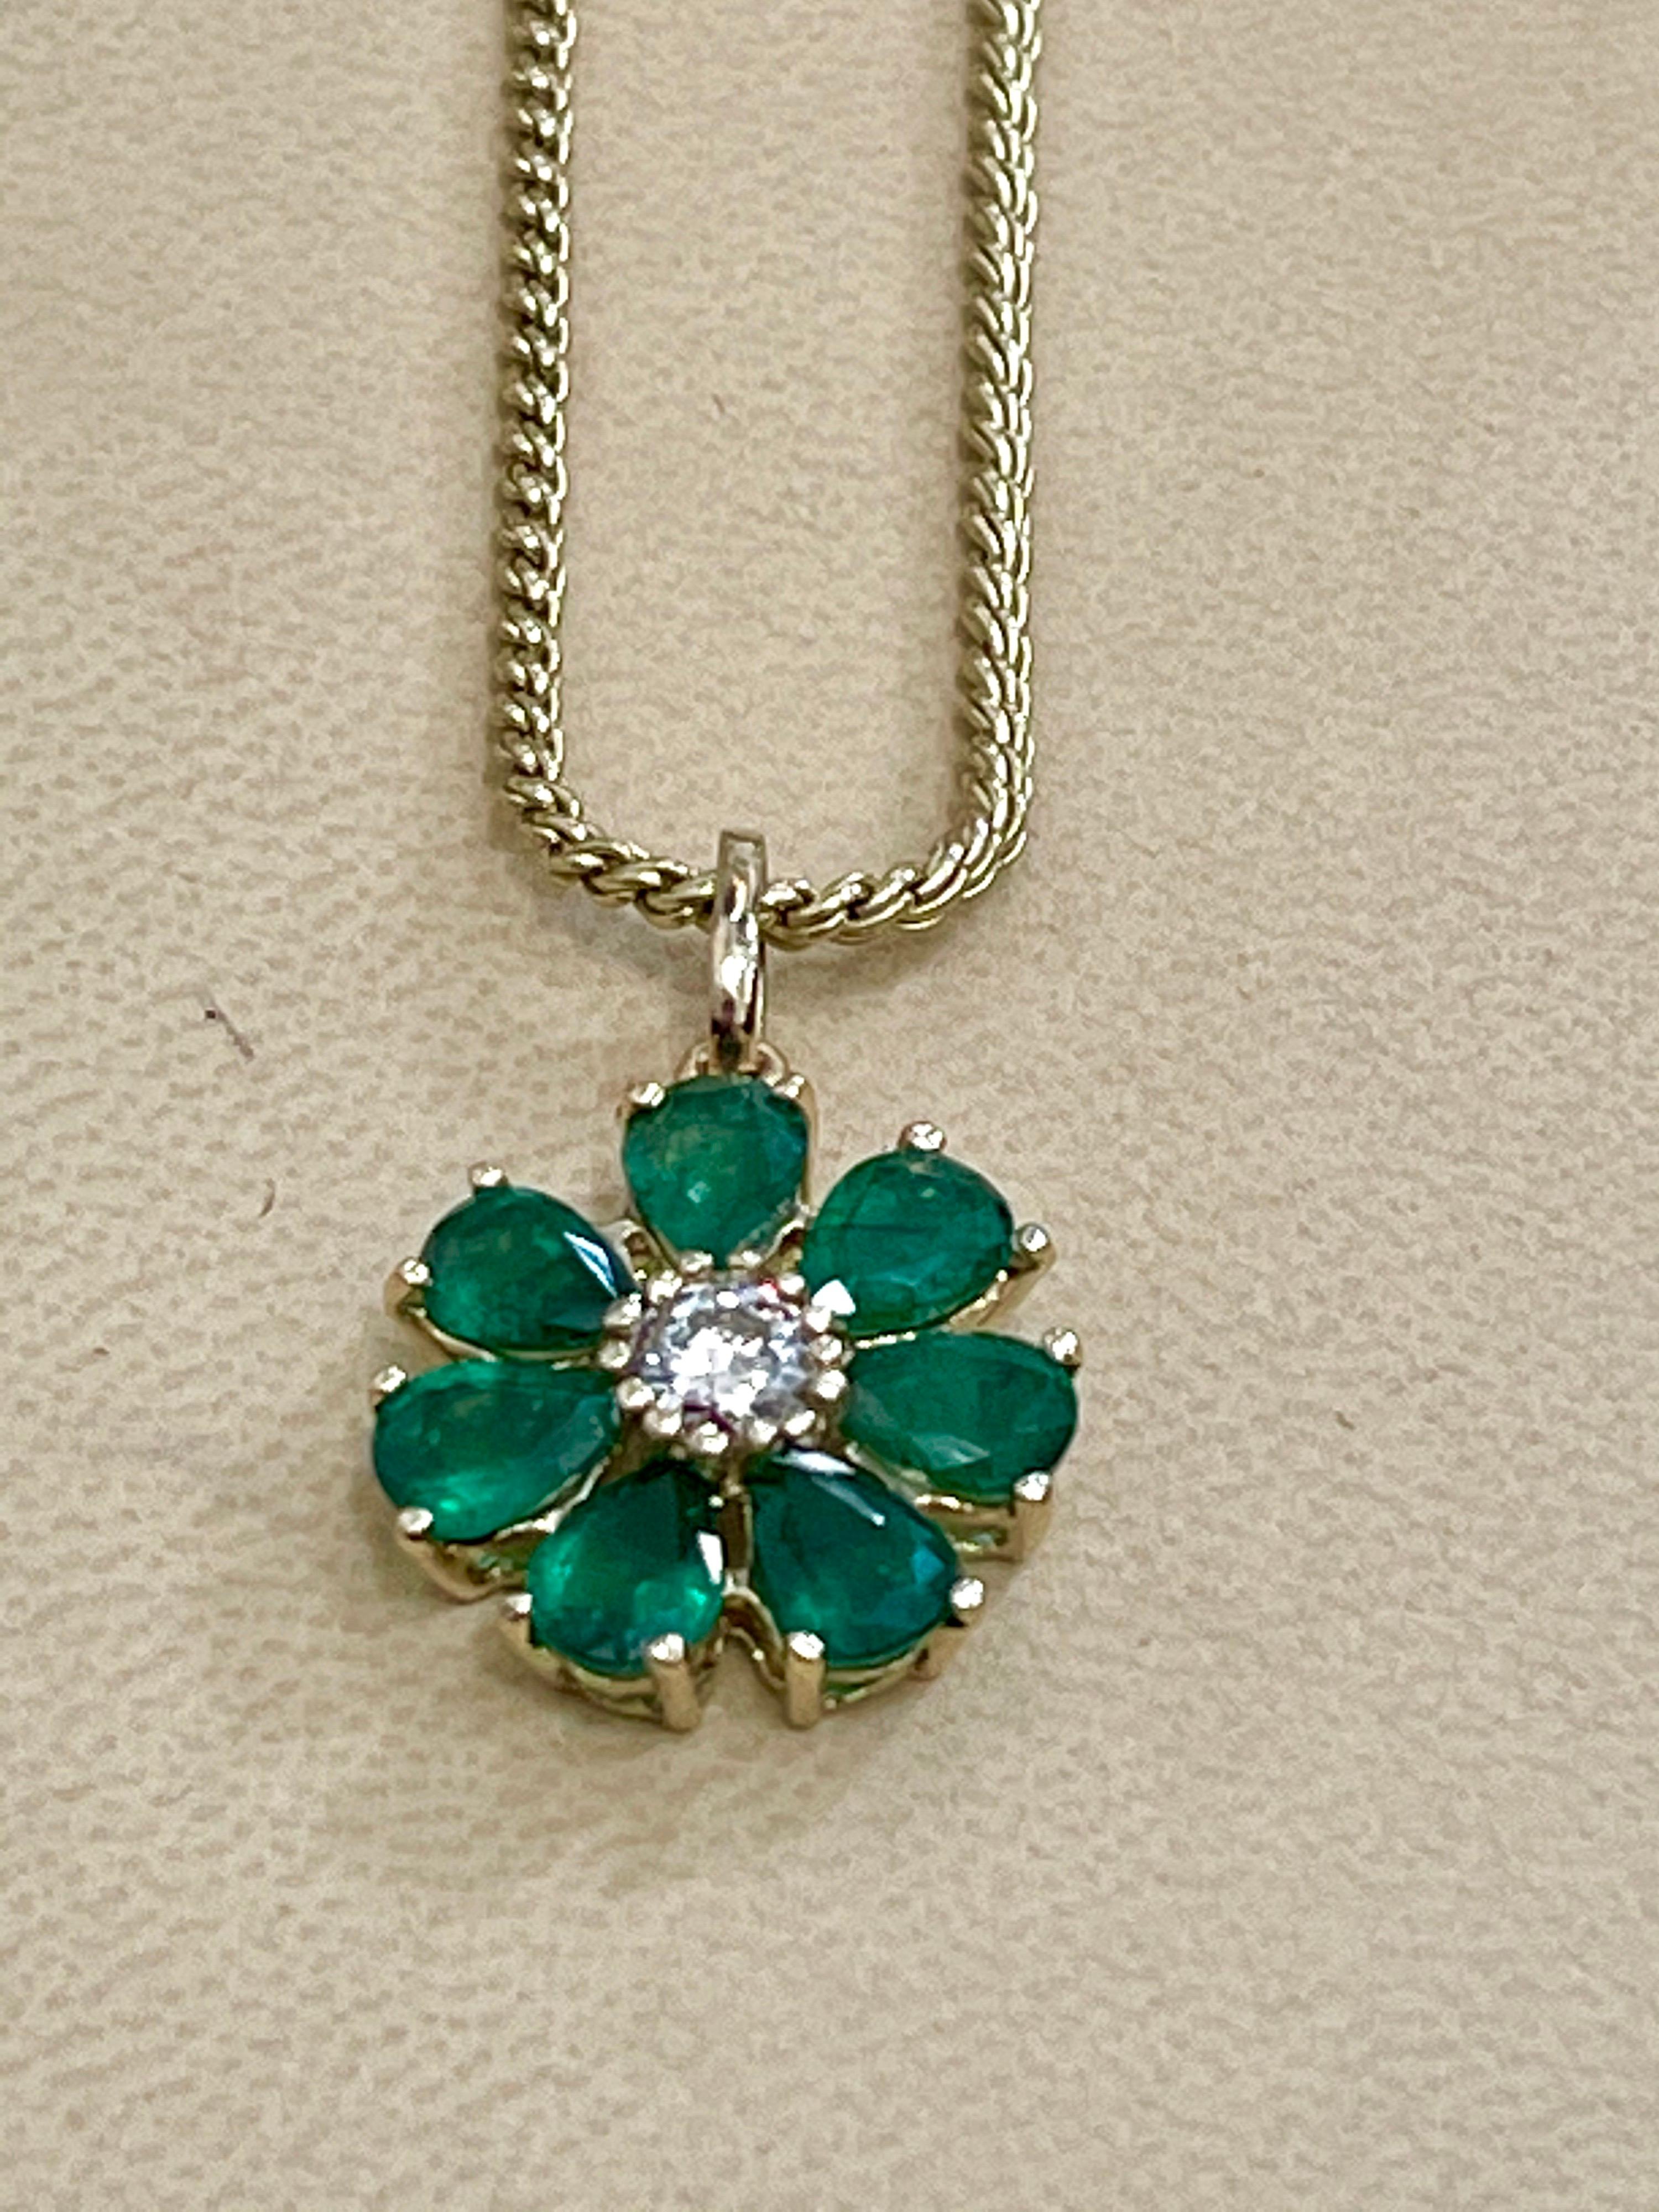 
Emerald and Solitaire Diamonds Flower Pendant Necklace 14 Karat Yellow Gold Chain 
App0roximately  5 Carat  Round Cut Emerald  and 0.40  ct  solitaire diamond flower pendant 

This exquisite Pendant is beautifully crafted with 14 karat  Yellow gold